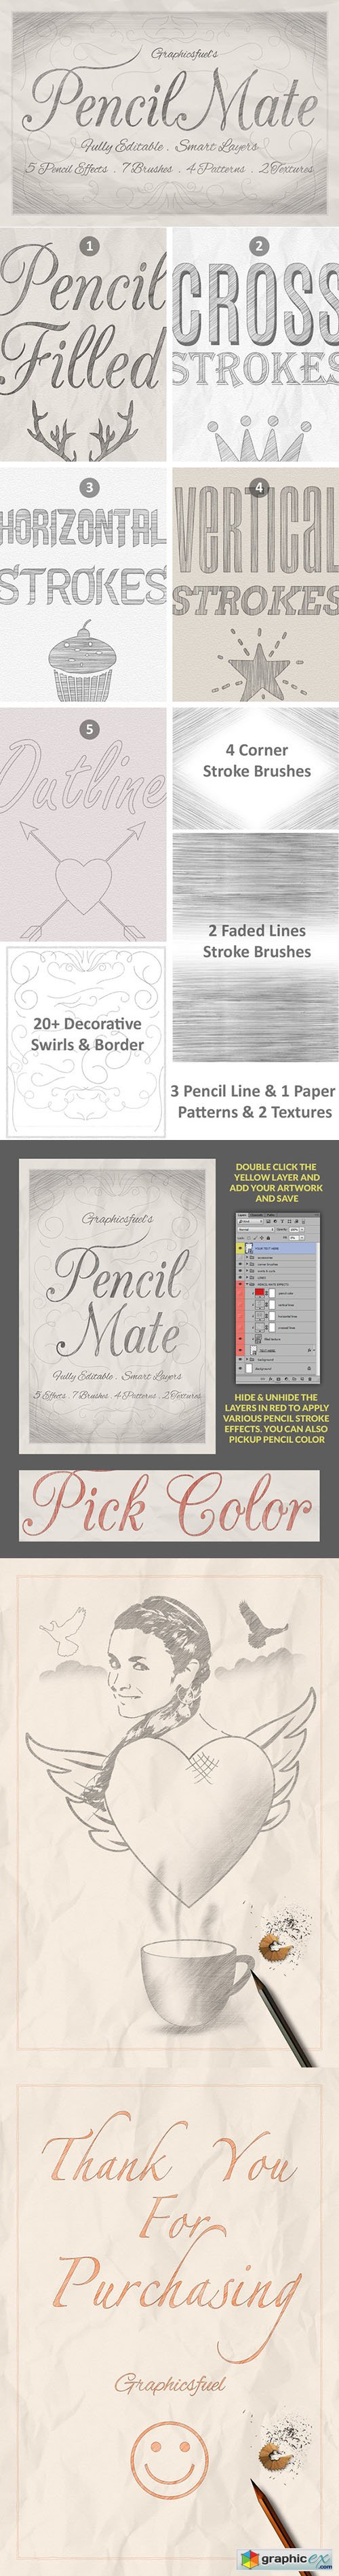 PencilMate - Pencil Effects